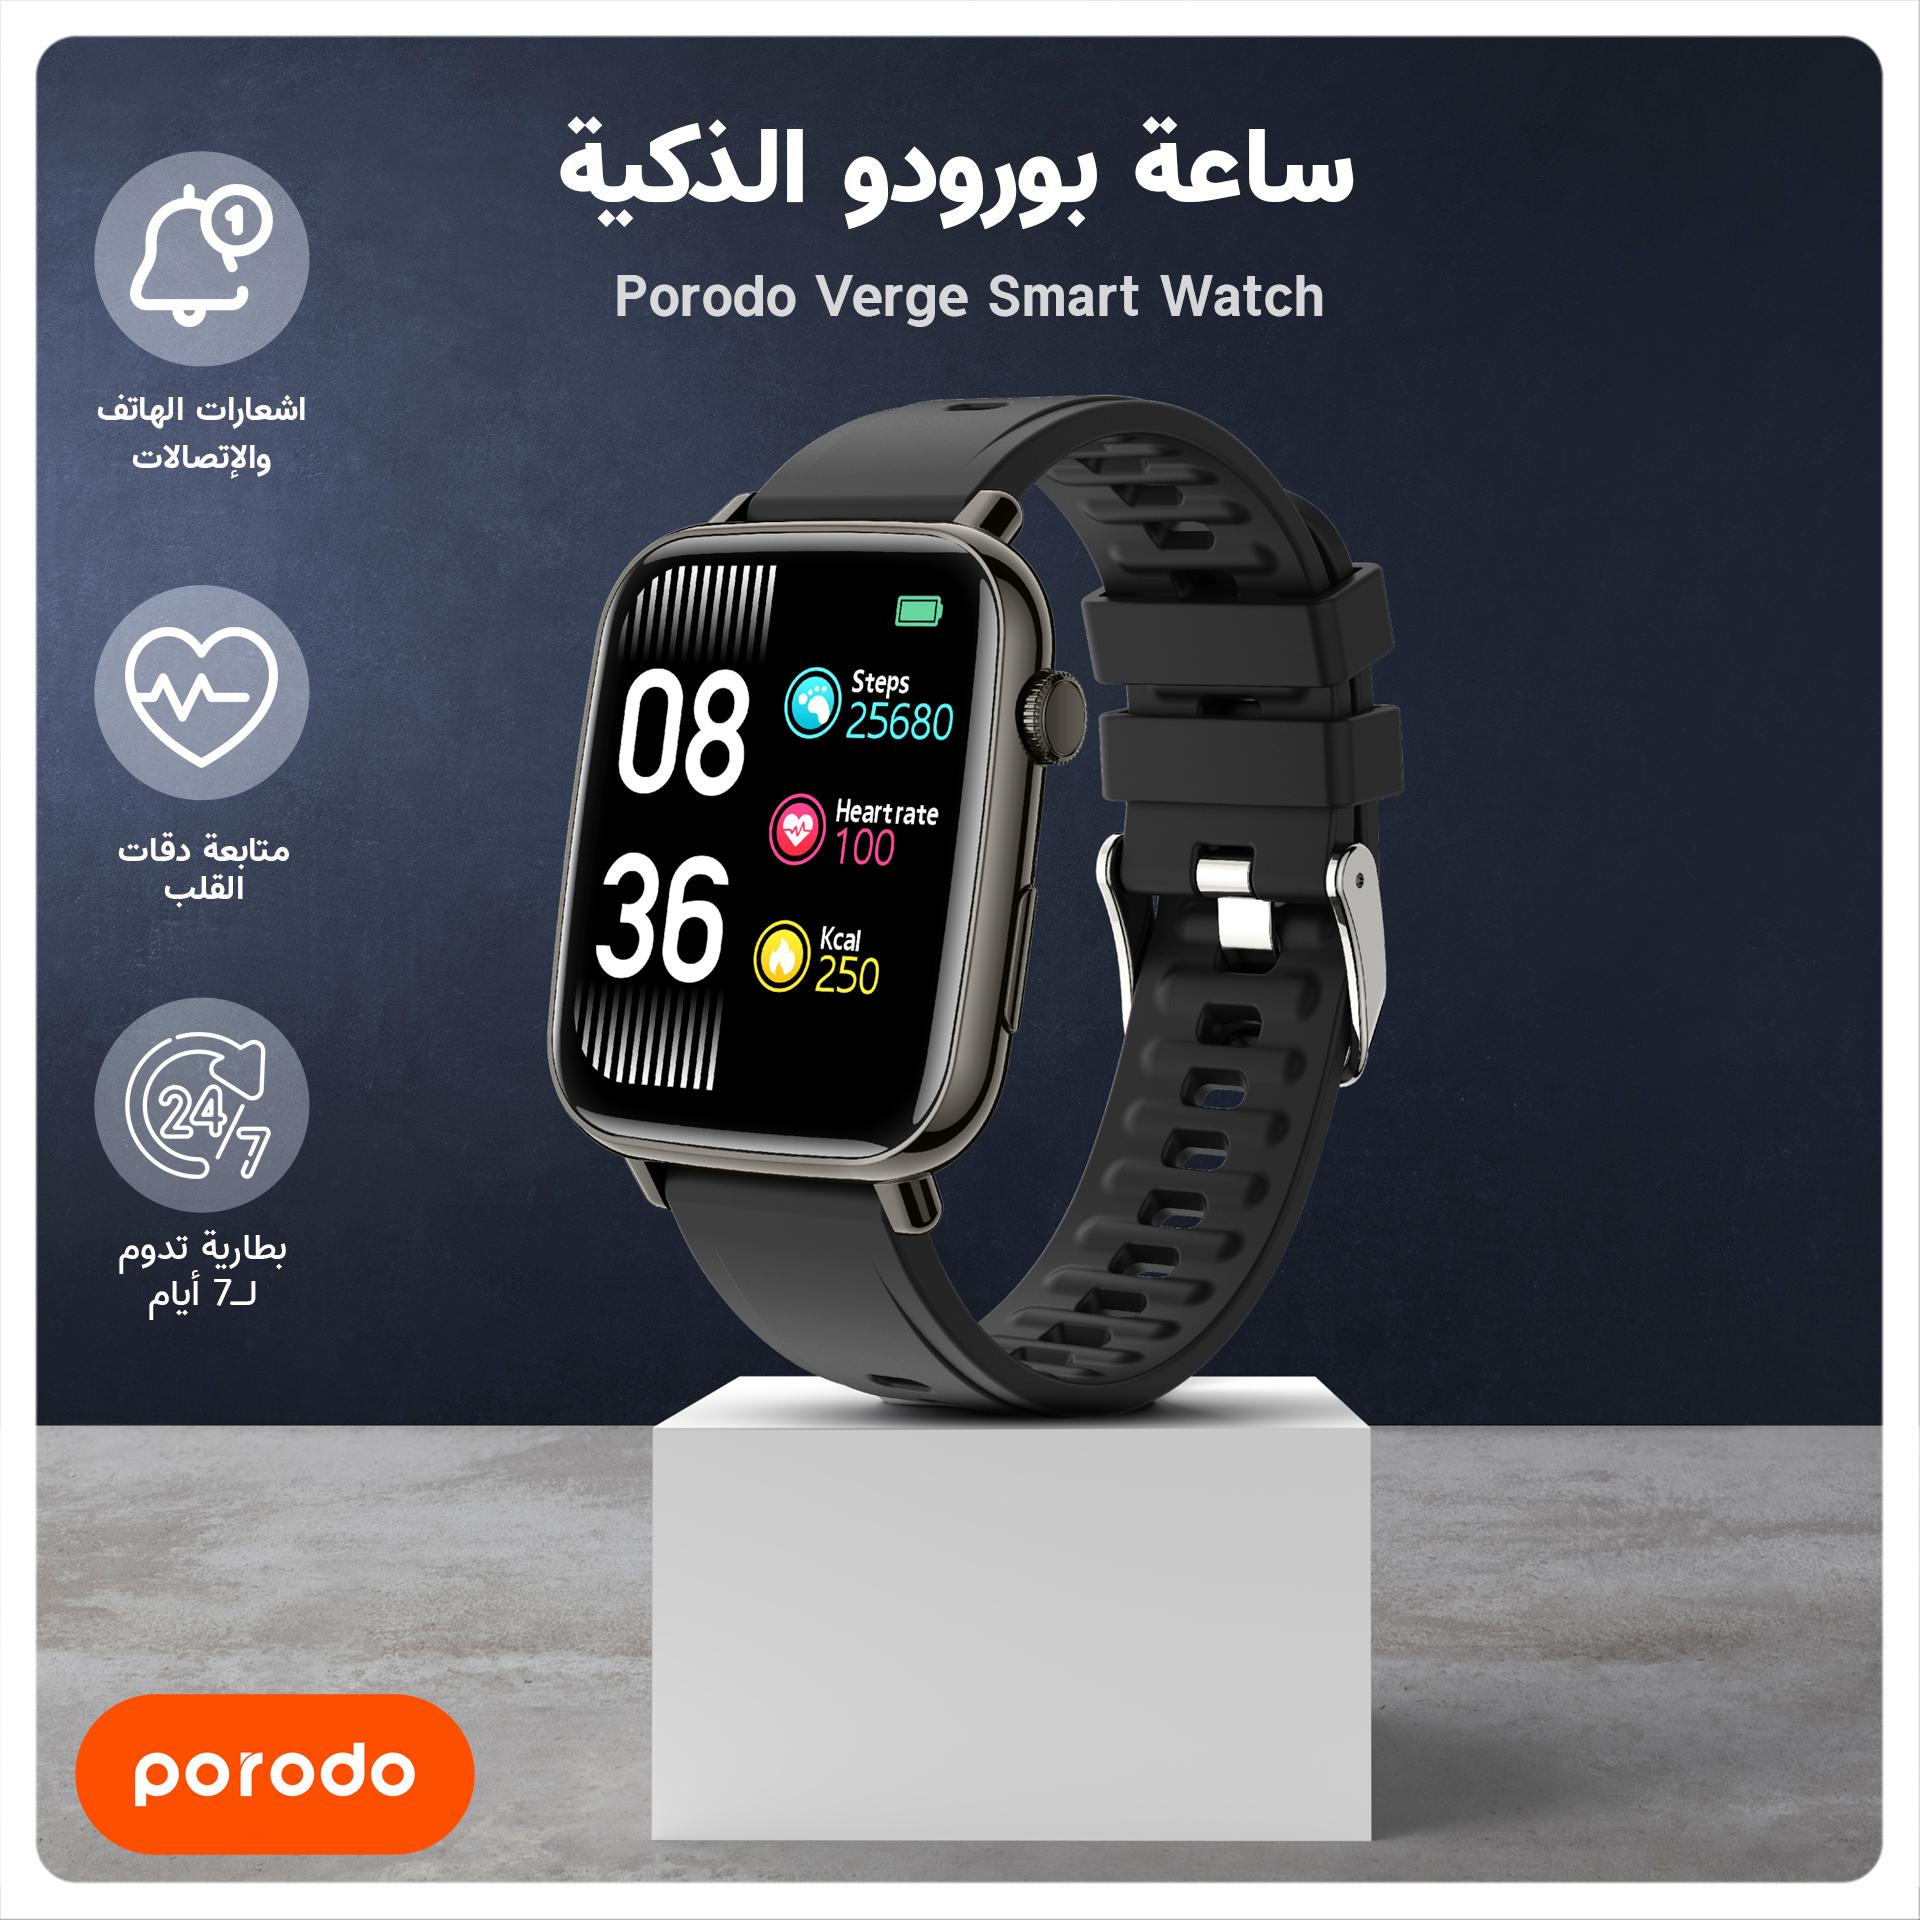 Porodo Verge Smart Watch with Fitness & Health Tracking - Black